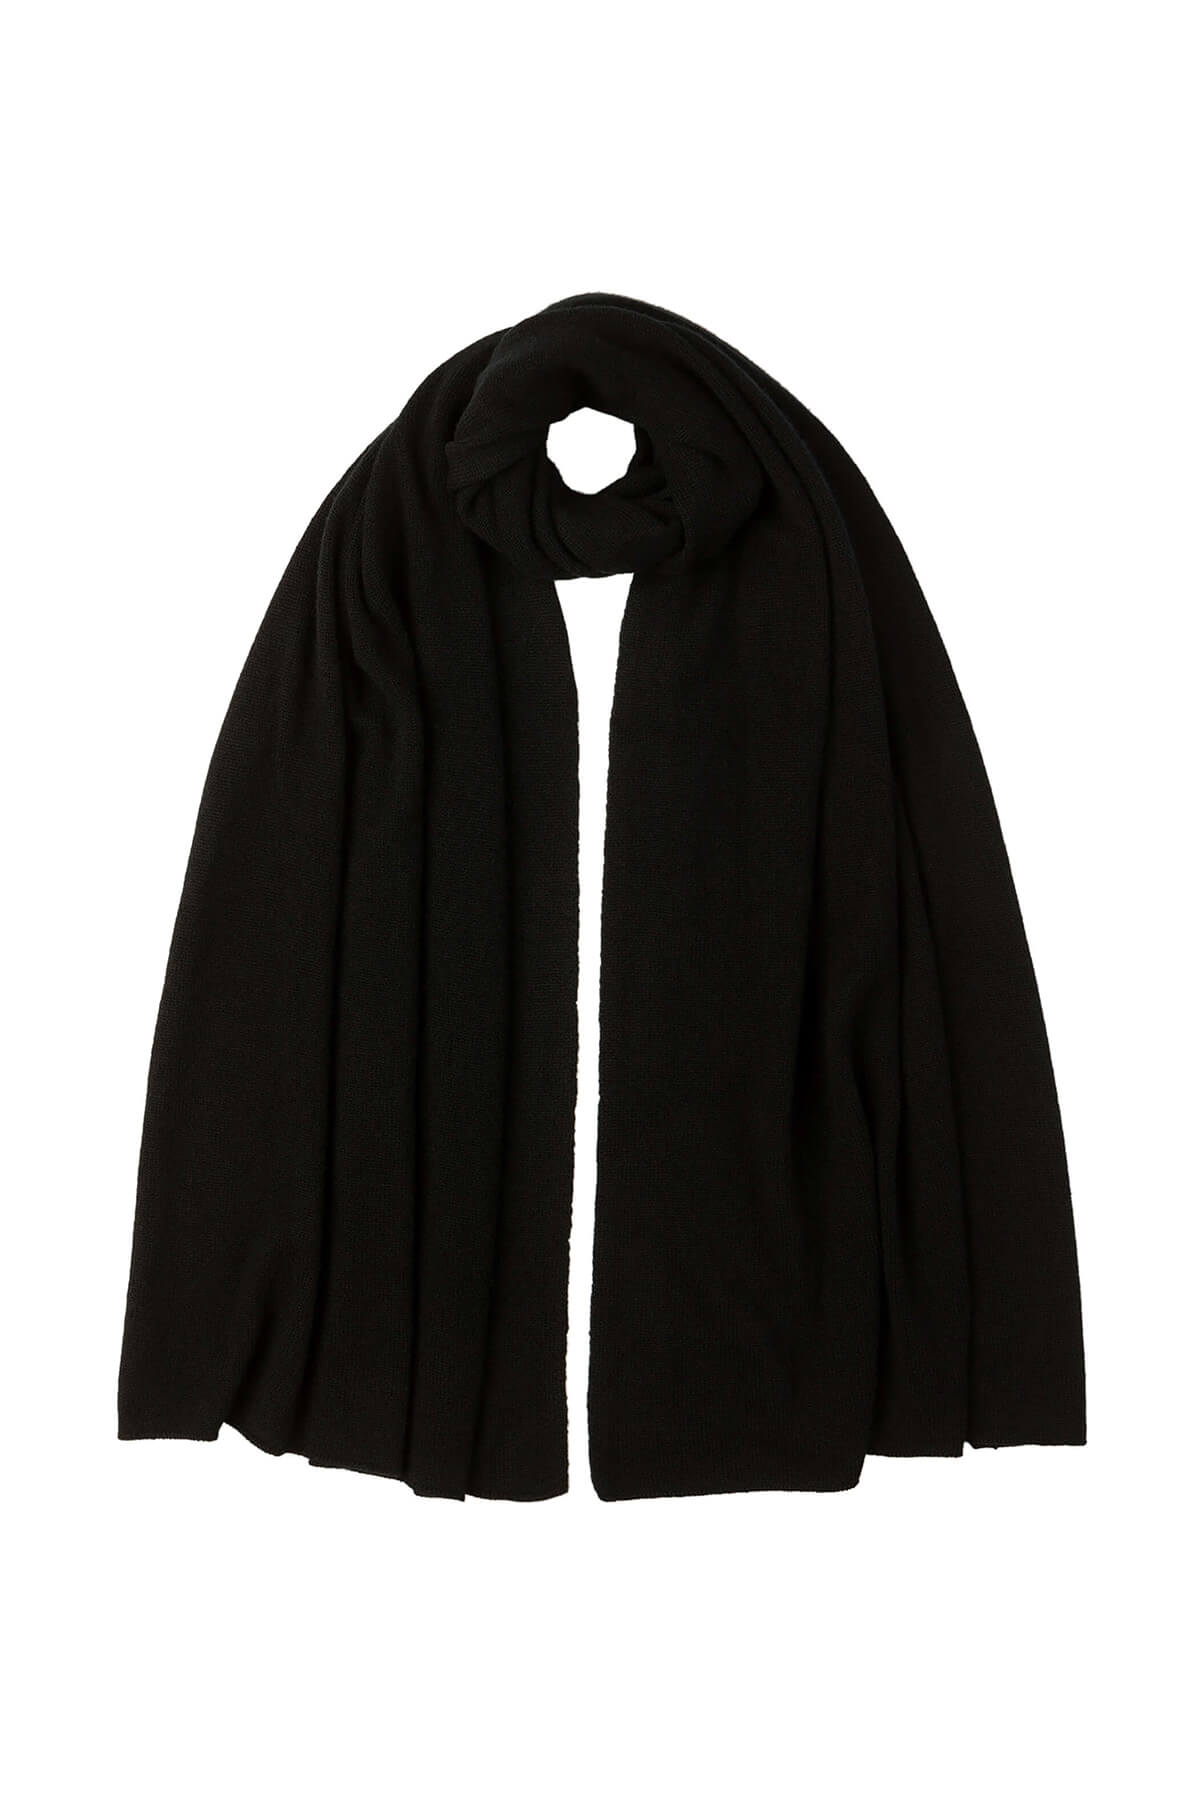 Johnstons of Elgin’s Black Knitted Gauzy Cashmere Stole on white background HAM00162SA0900